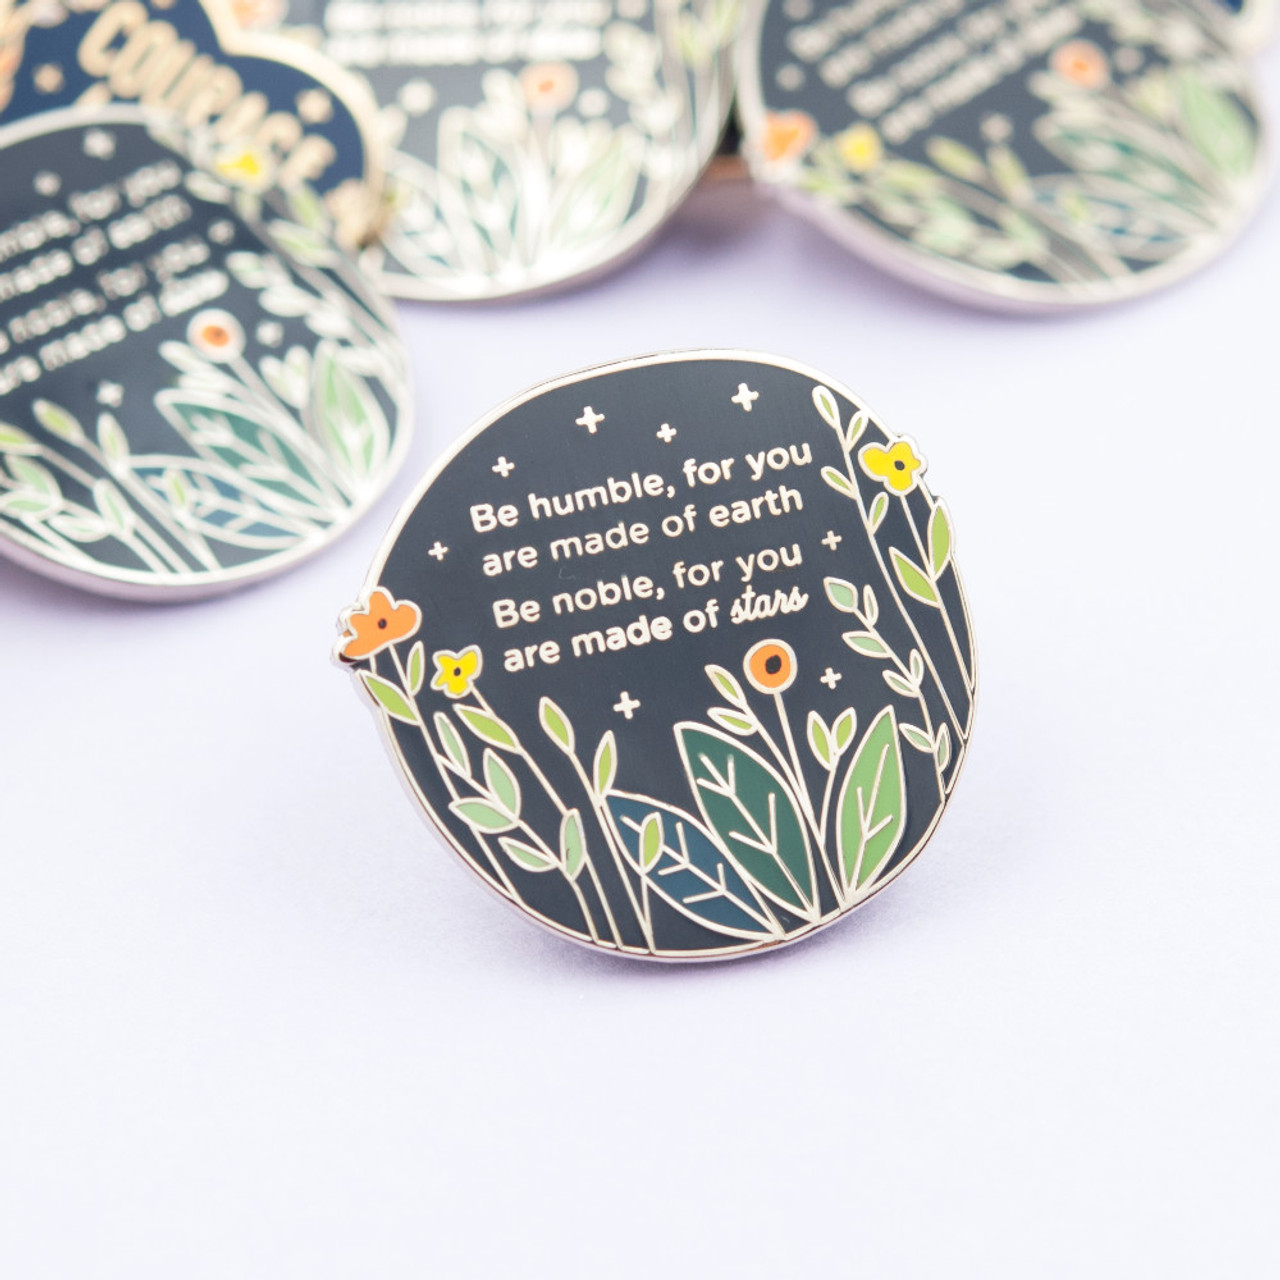 The Clever Clove - Enamel Pins